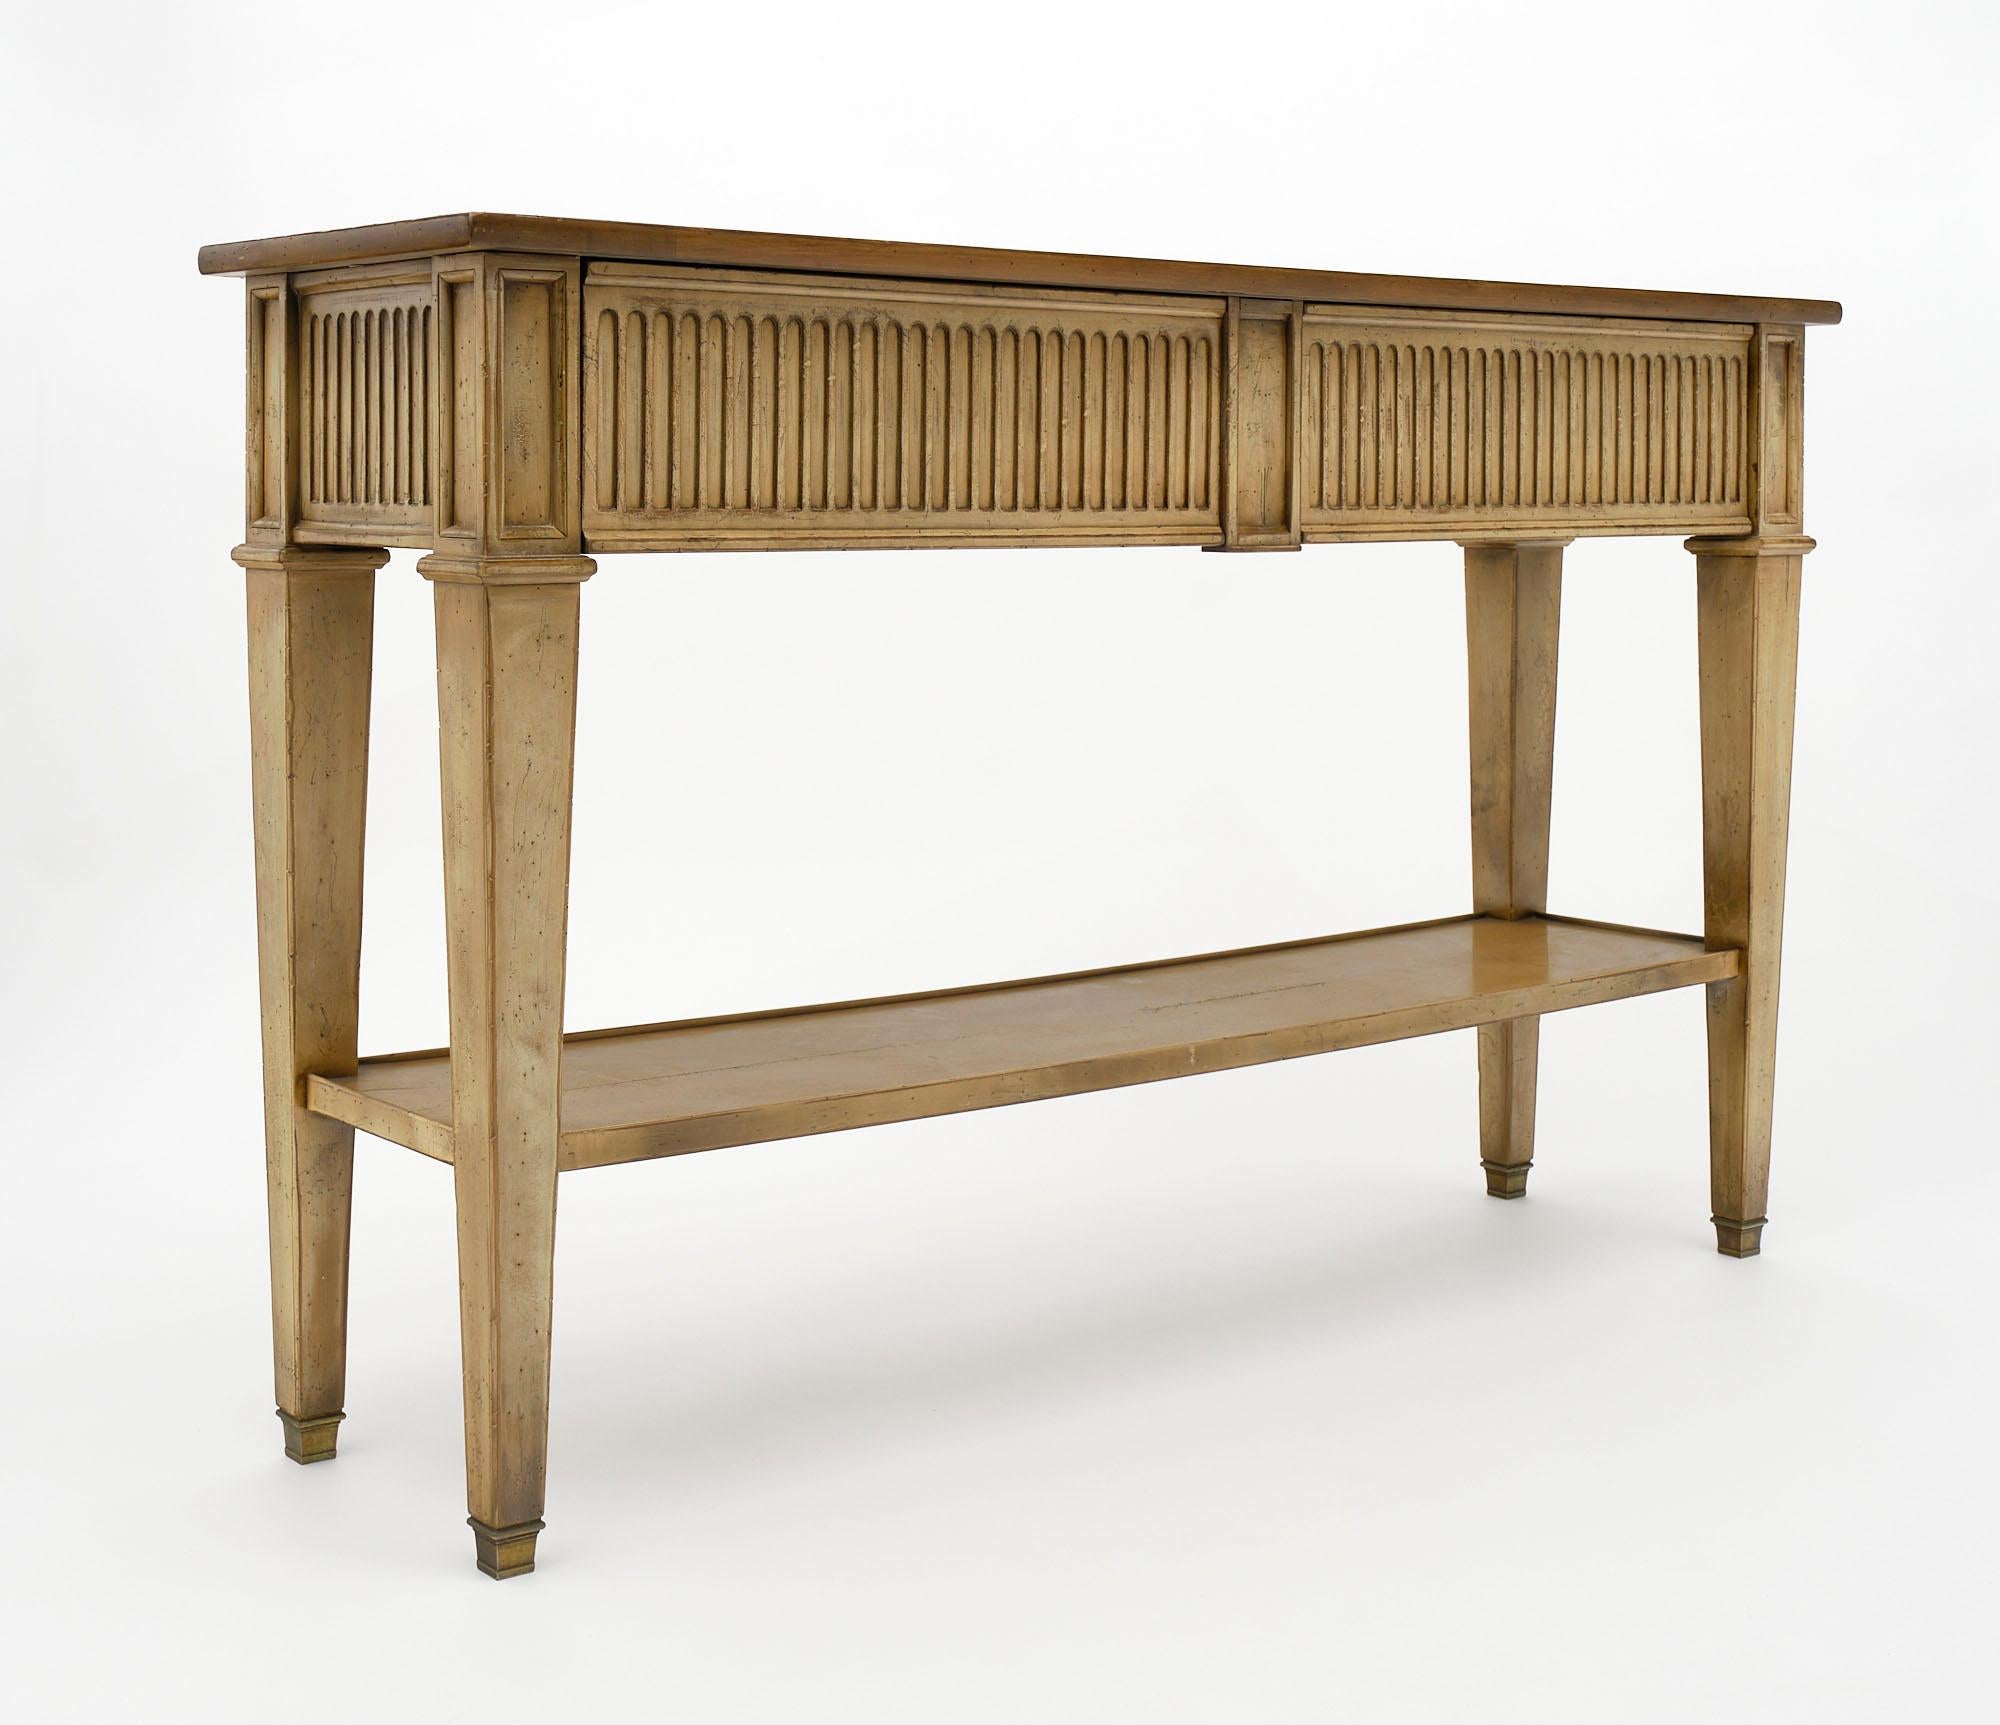 Console from France made of hand-carved wood; painted and patinated. There are two dovetailed drawers and a bottom shelf.